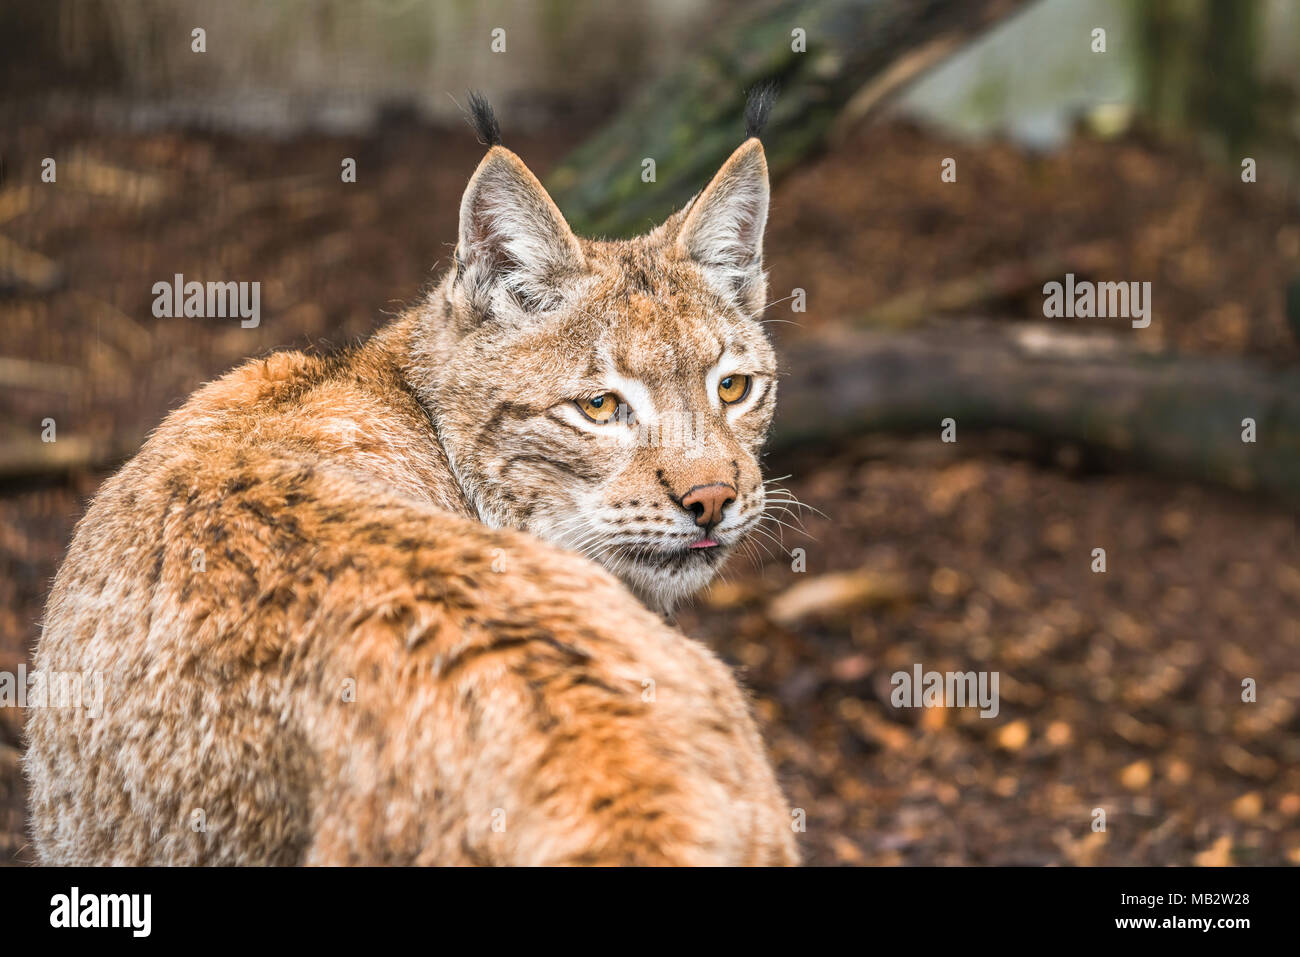 Lynx A A Short Tail Wild Cat With Characteristic Tufts Of Black Hair On The Tips Of The Ears Stock Photo Alamy